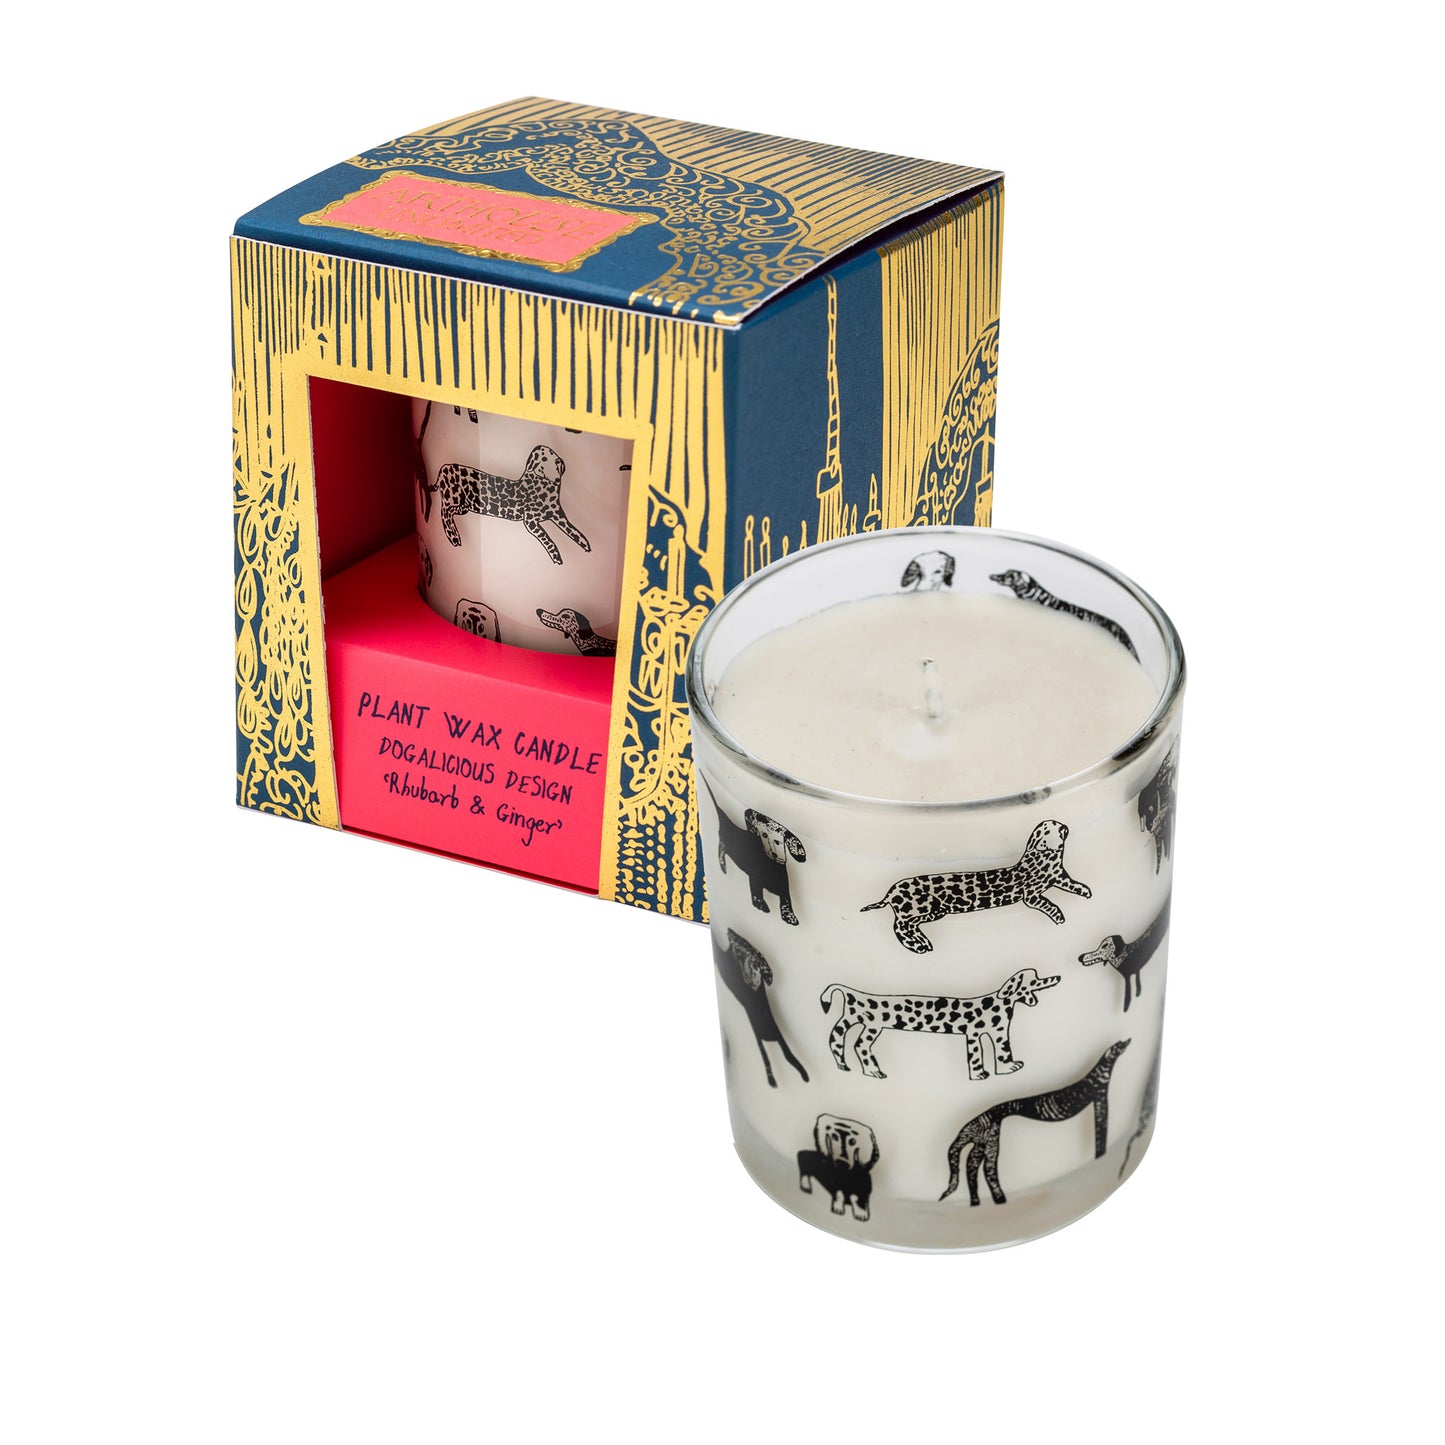 Rhubarb & Ginger 'Dogs' Plant Wax Candle